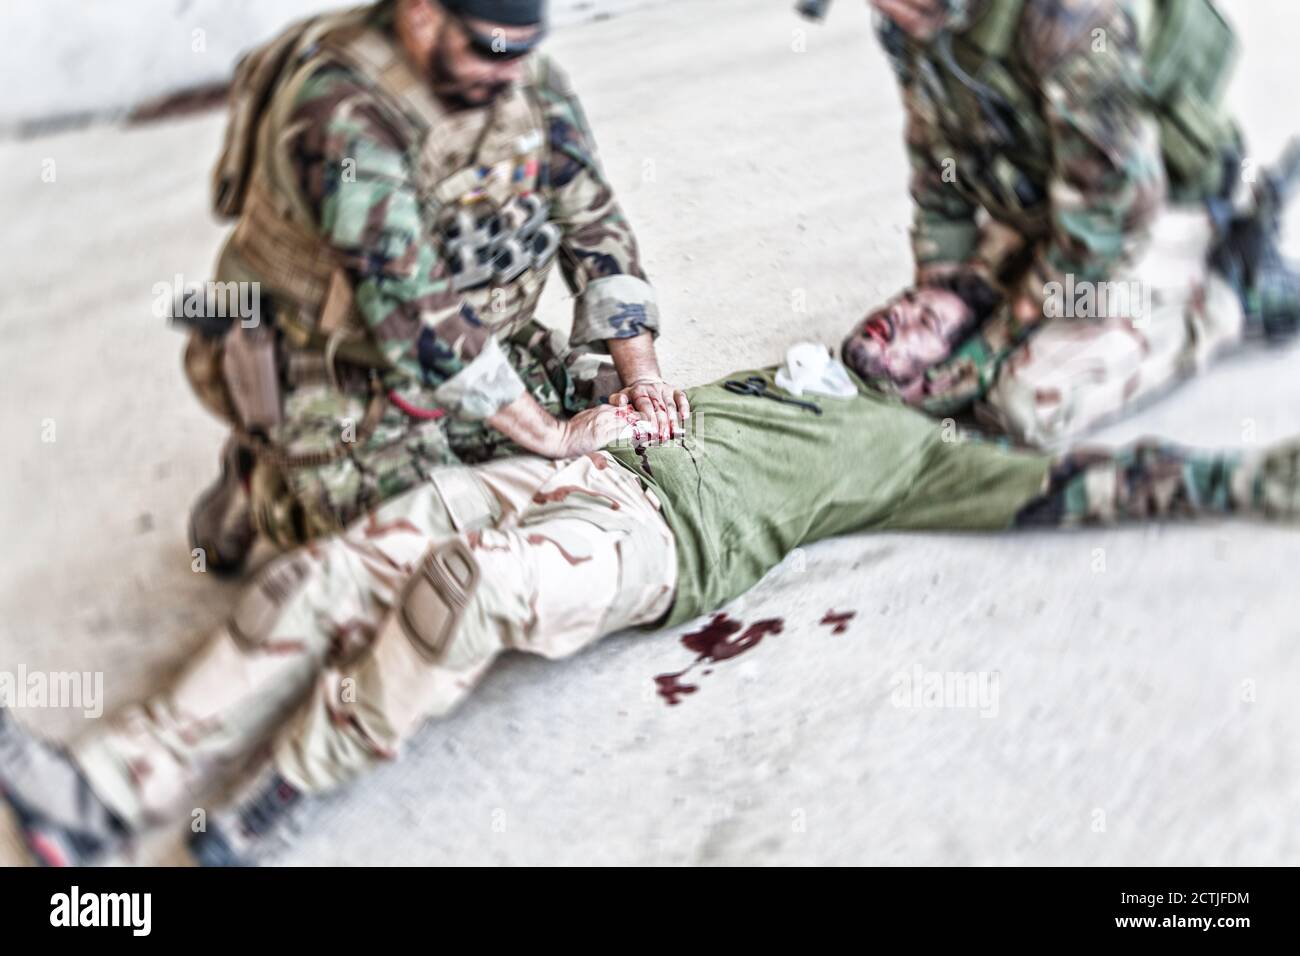 Soldiers trying to stop bleeding at wounded comrade who lying on floor, suffering and screaming in paine. Commando fighter pressing with hands on bloody wound at friends stomach, giving emergency care Stock Photo